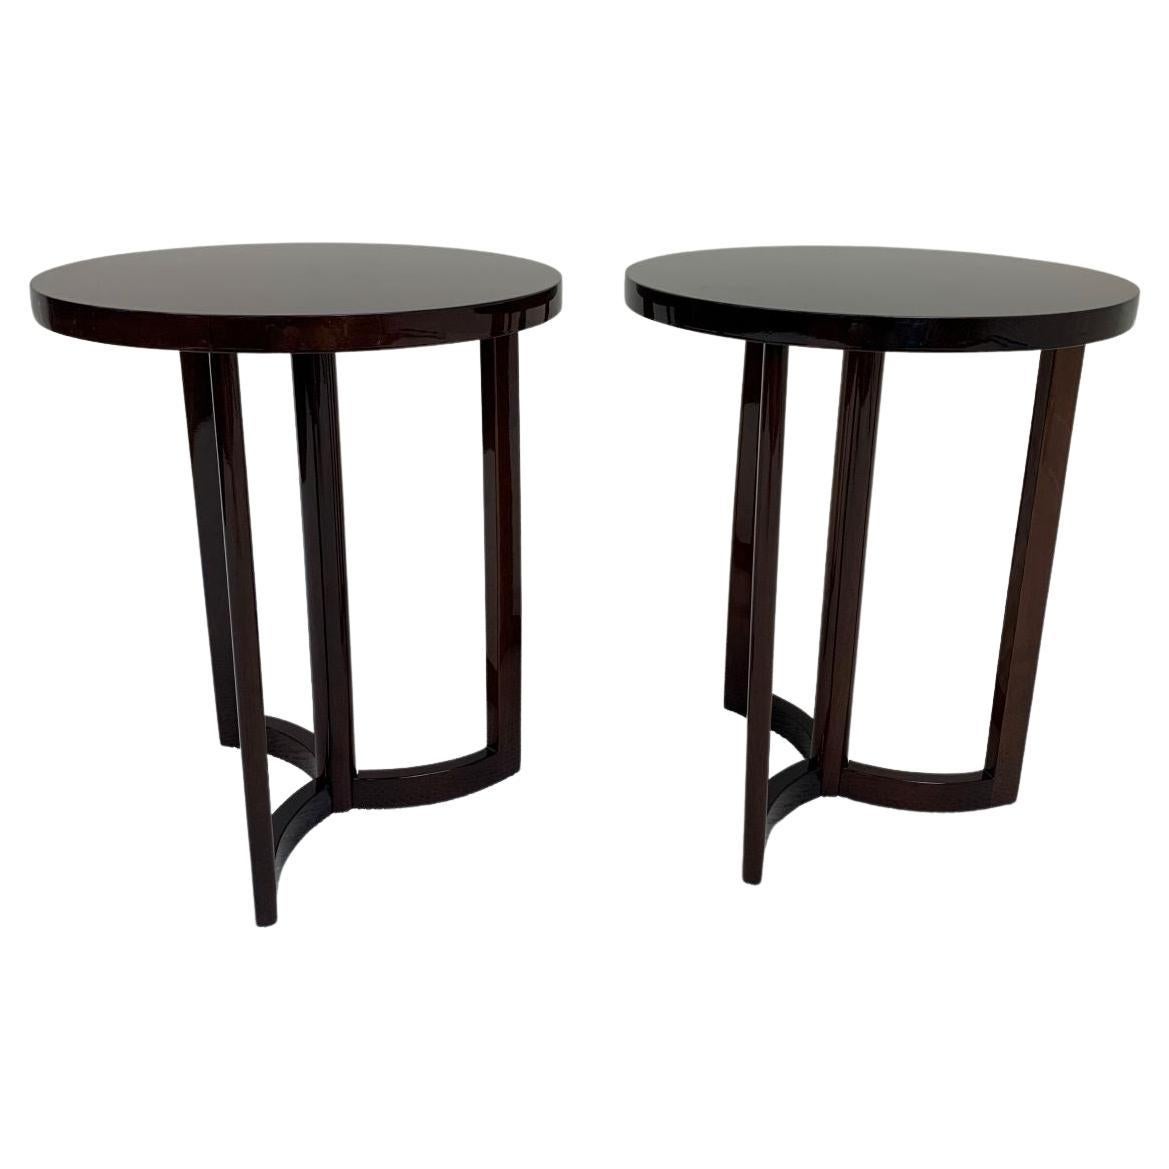 Great pair of round Art Deco end tables with solid walnut bases with a unique pinwheel design. Table tops are adorned with a beautiful walnut veneer tops. Tables could be used either as side tables or bedside tables. American C. 1940’s dimensions